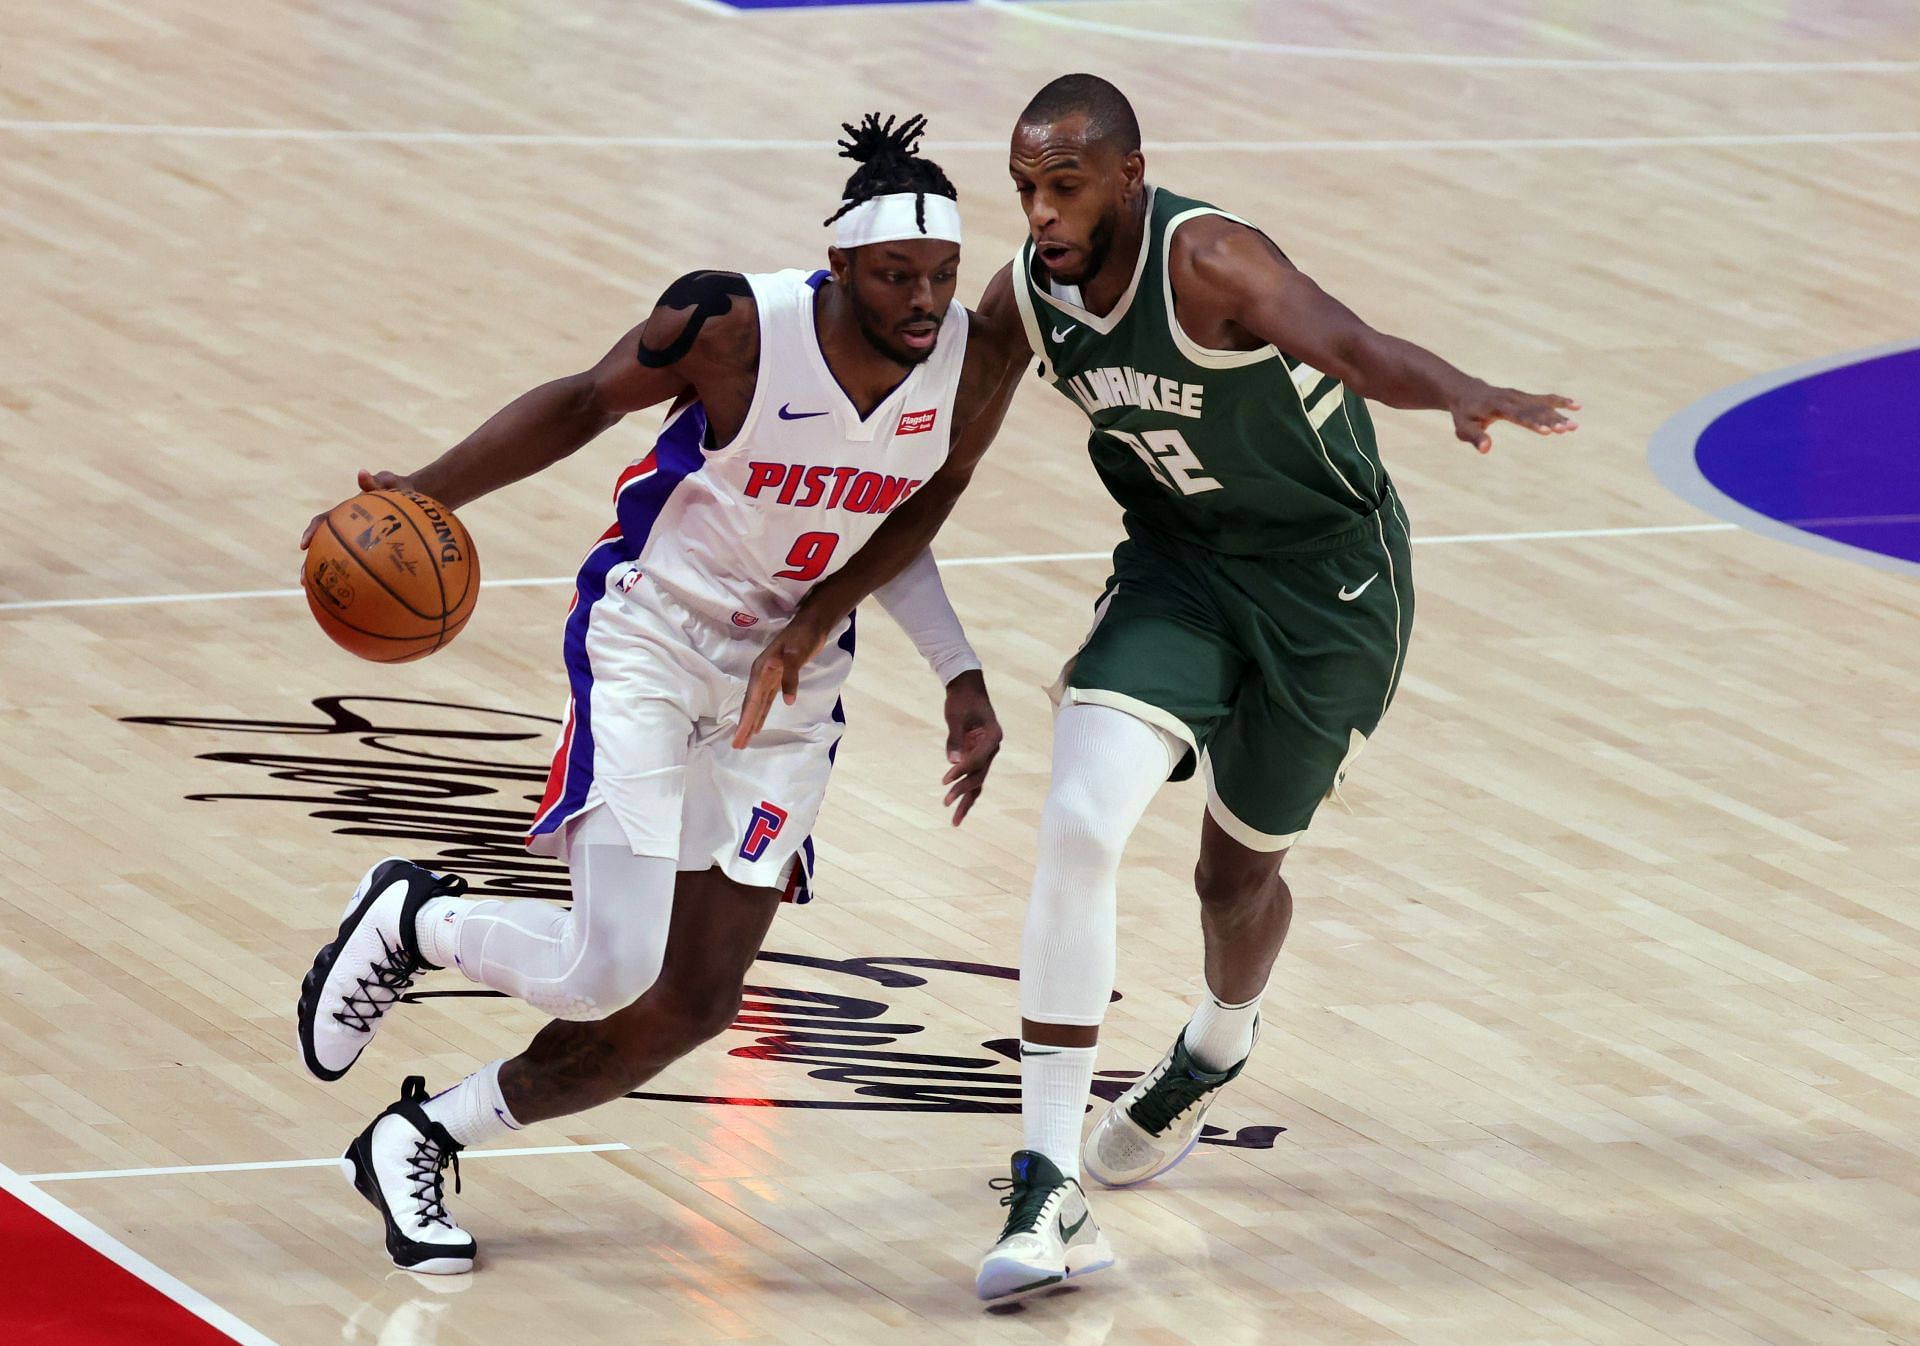 The Milwaukee Bucks will be looking to end their three-game losing skid against the Detroit Pistons [Photo: Detroit Free Press]